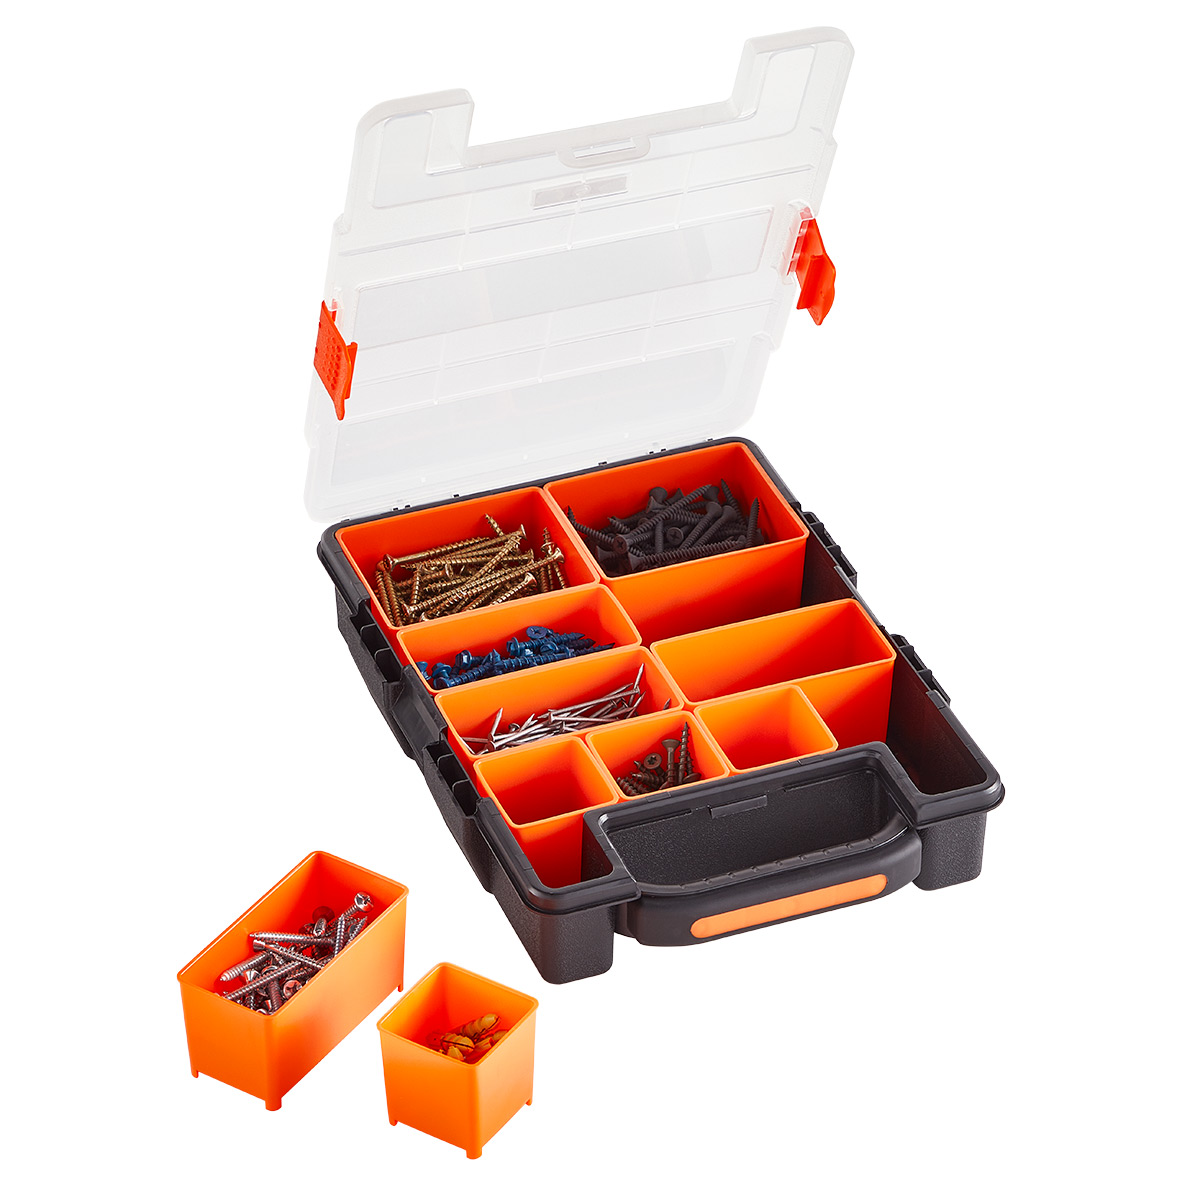 Small Parts Organizer with Removable Bins | The Container Store